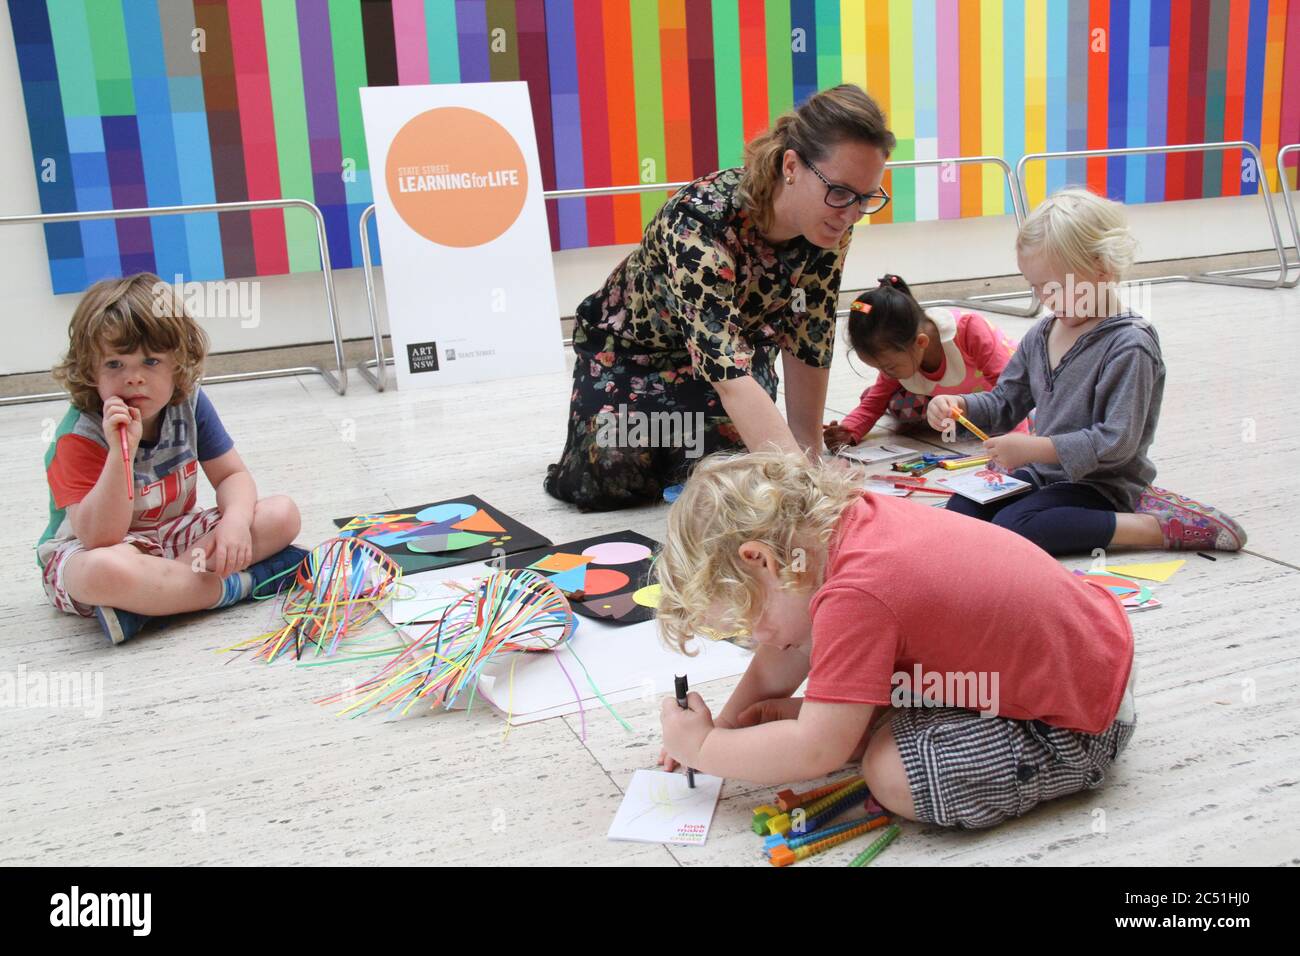 State Street Learning for Life program ambassador, artist Del Kathryn Barton plays with children at the launch event. Stock Photo